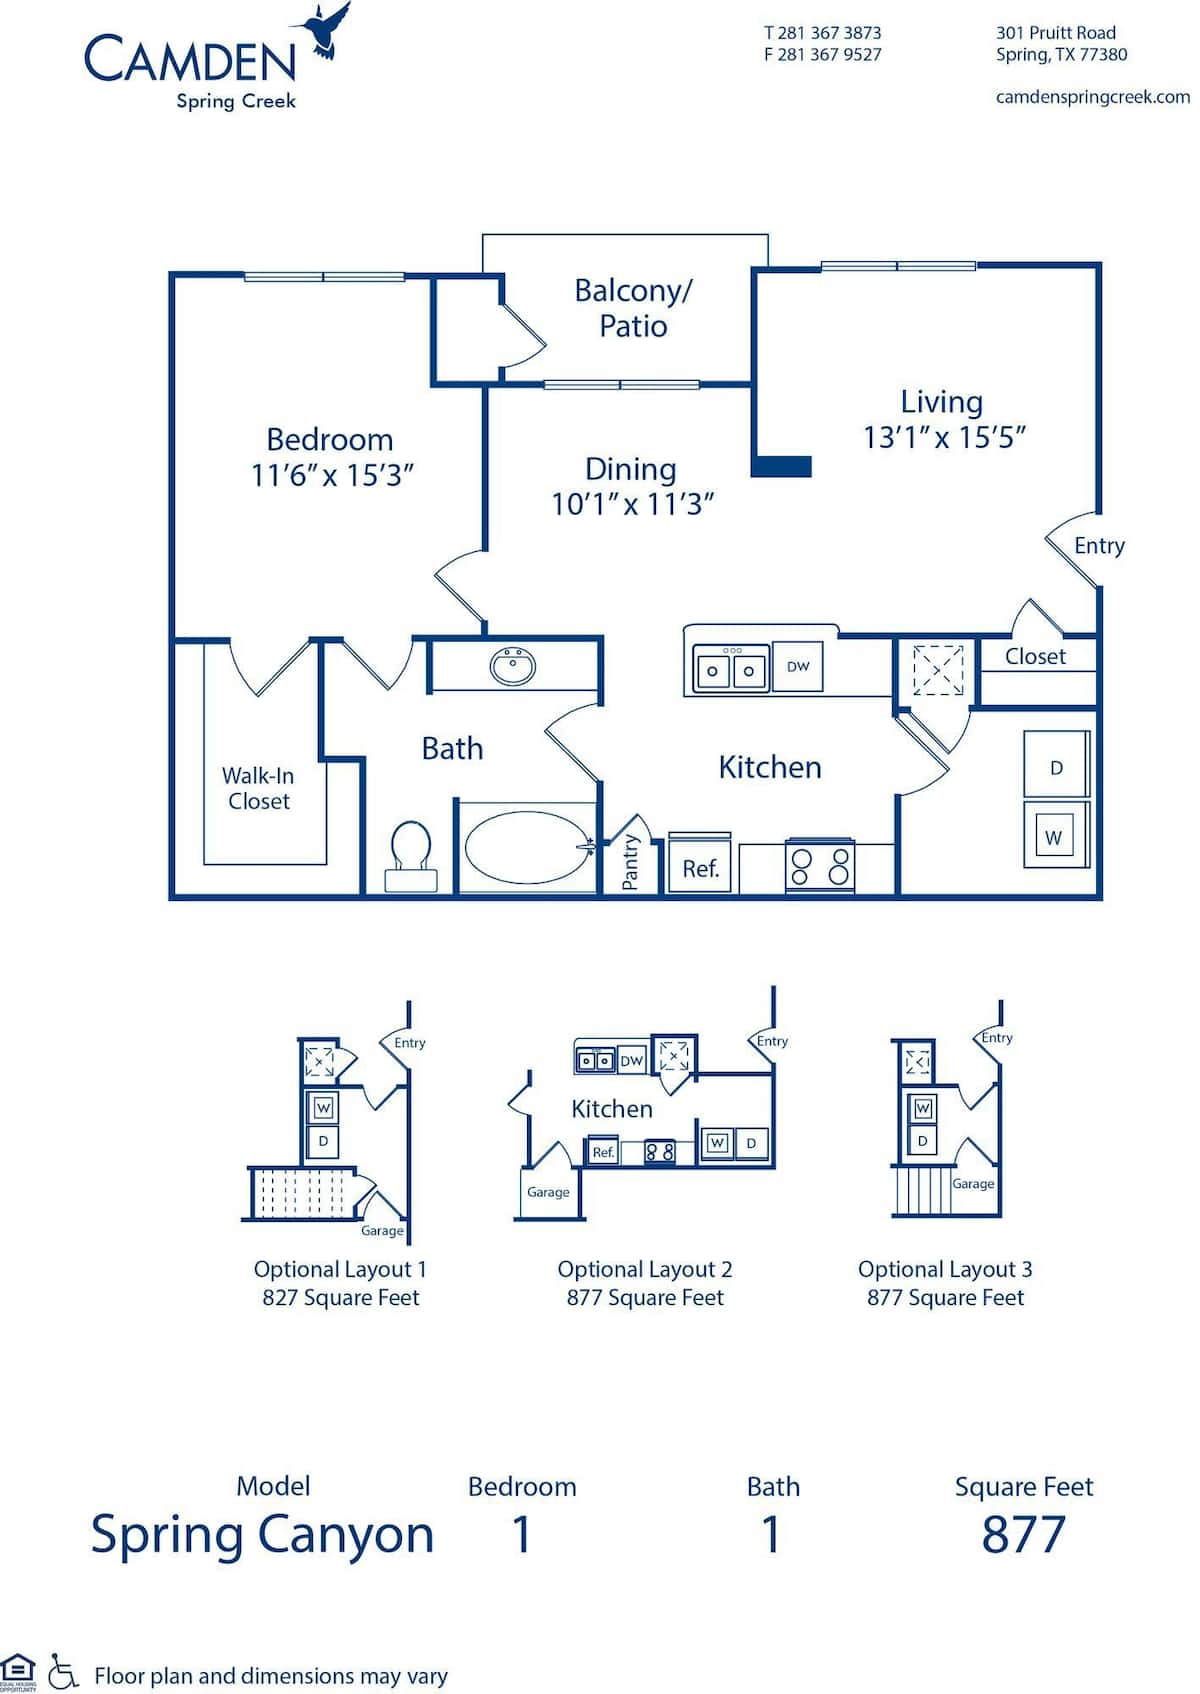 Floorplan diagram for Spring Canyon 3, showing 1 bedroom